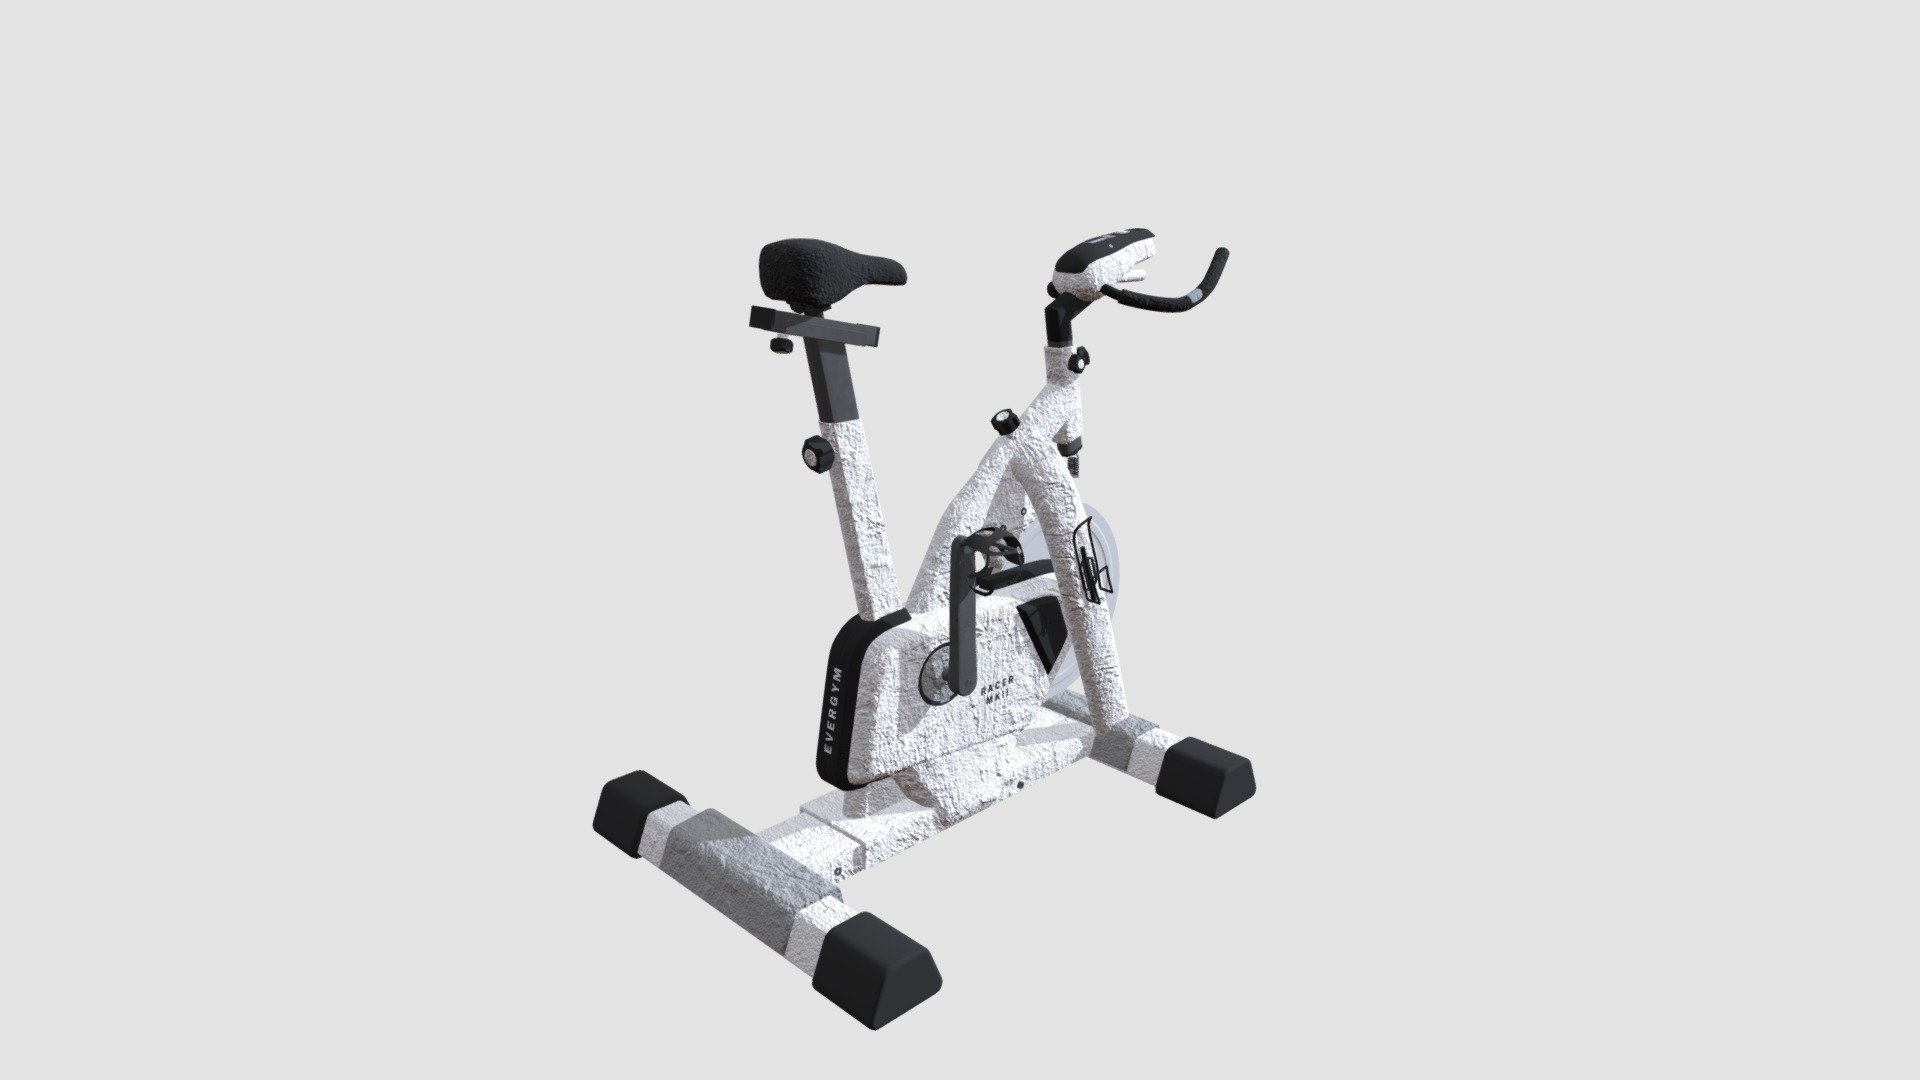 Highly detailed 3d model of gym equipment with all textures, shaders and materials. It is ready to use, just put it into your scene 3d model